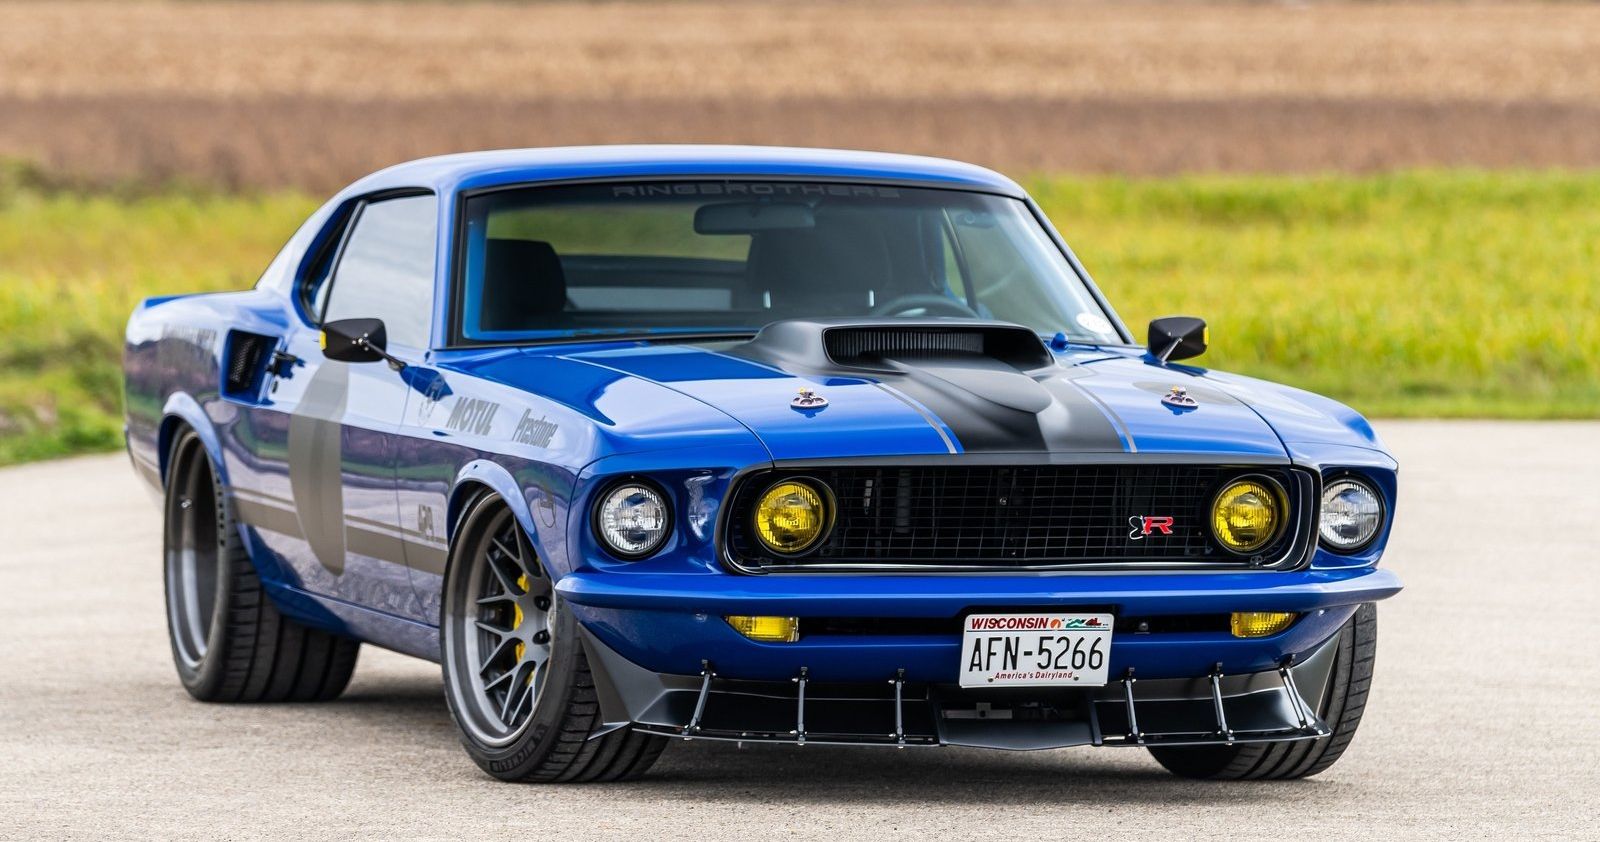 I’m Feeling Blue: Ringbrothers Latest 1969 Ford Mustang Mach 1